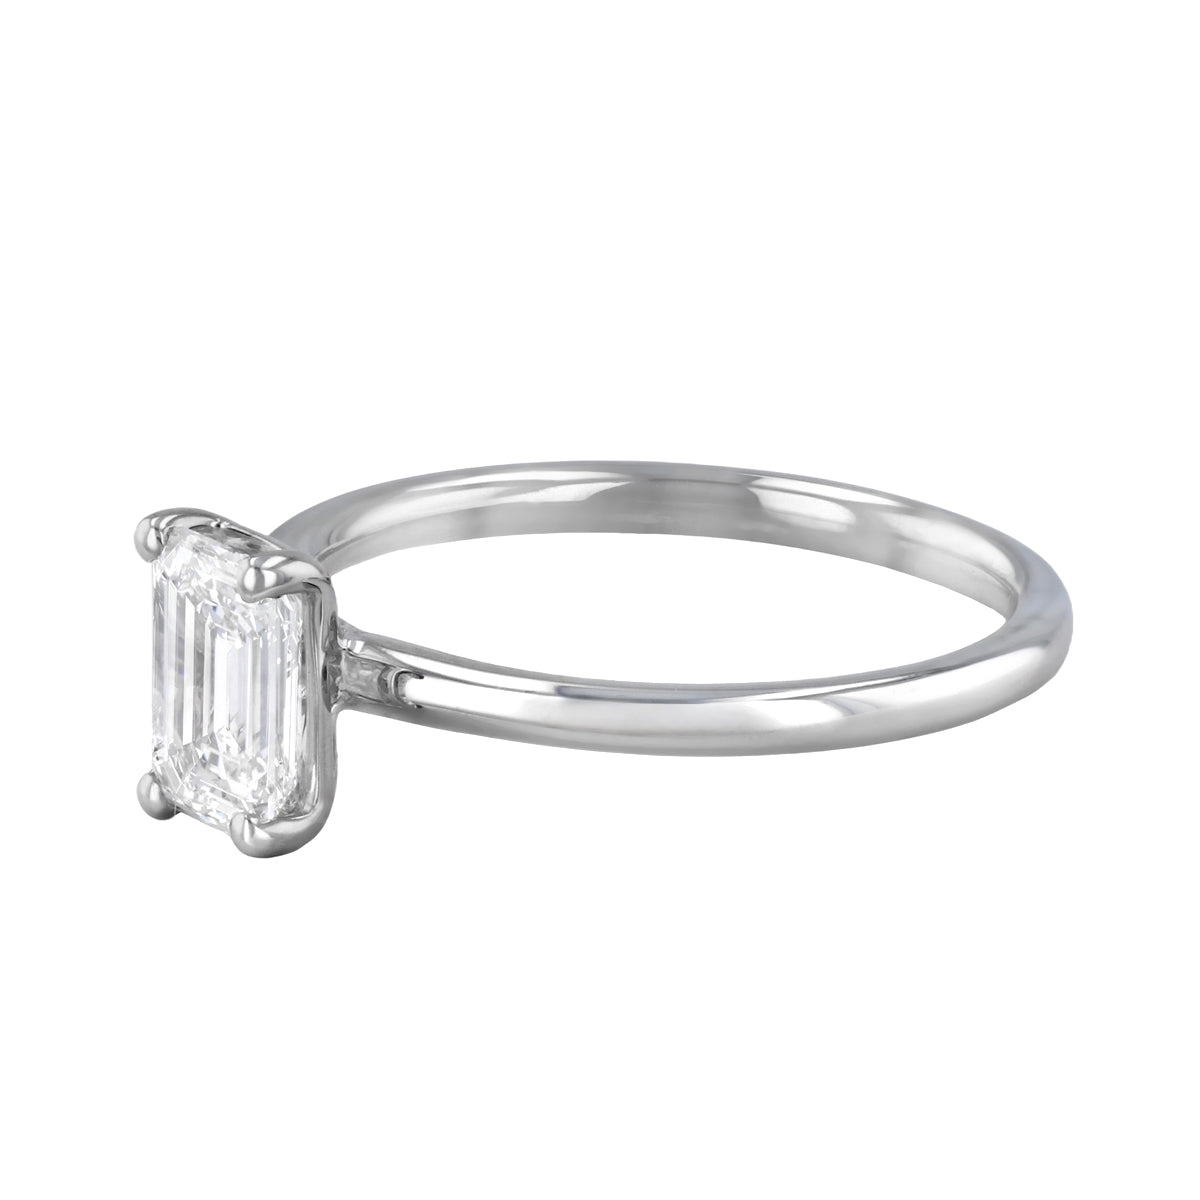 0-75ct-sofia-emerald-cut-solitaire-diamond-engagement-ring-18ct-white-gold